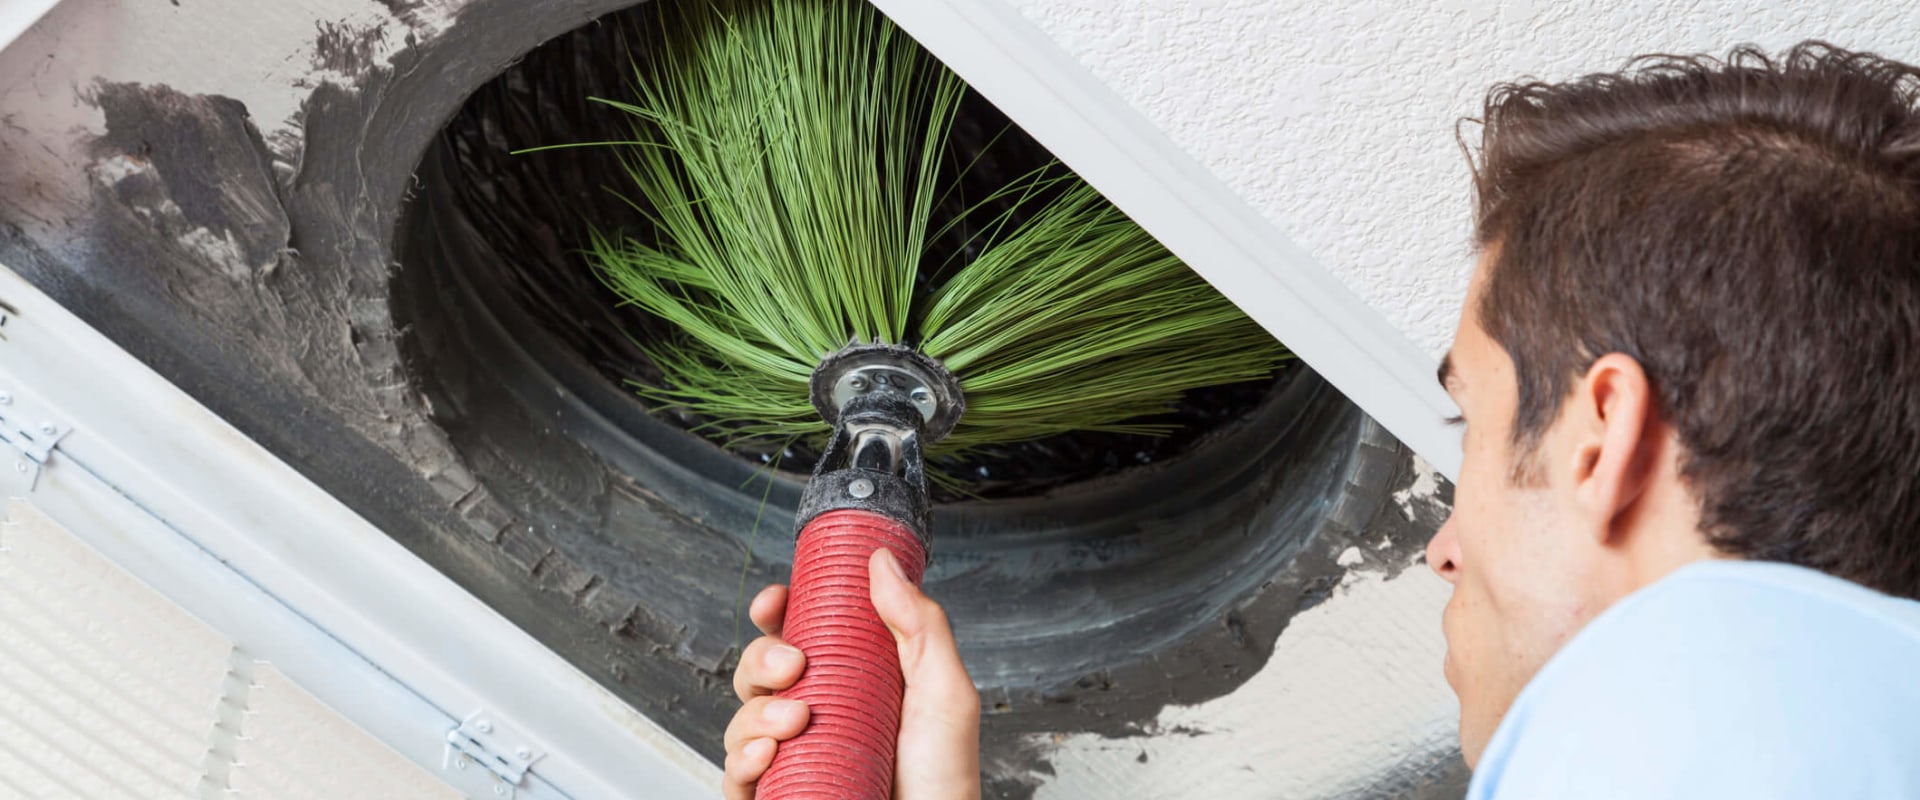 Air Conditioning Duct Repair Services in Pembroke Pines, FL: What You Need to Know